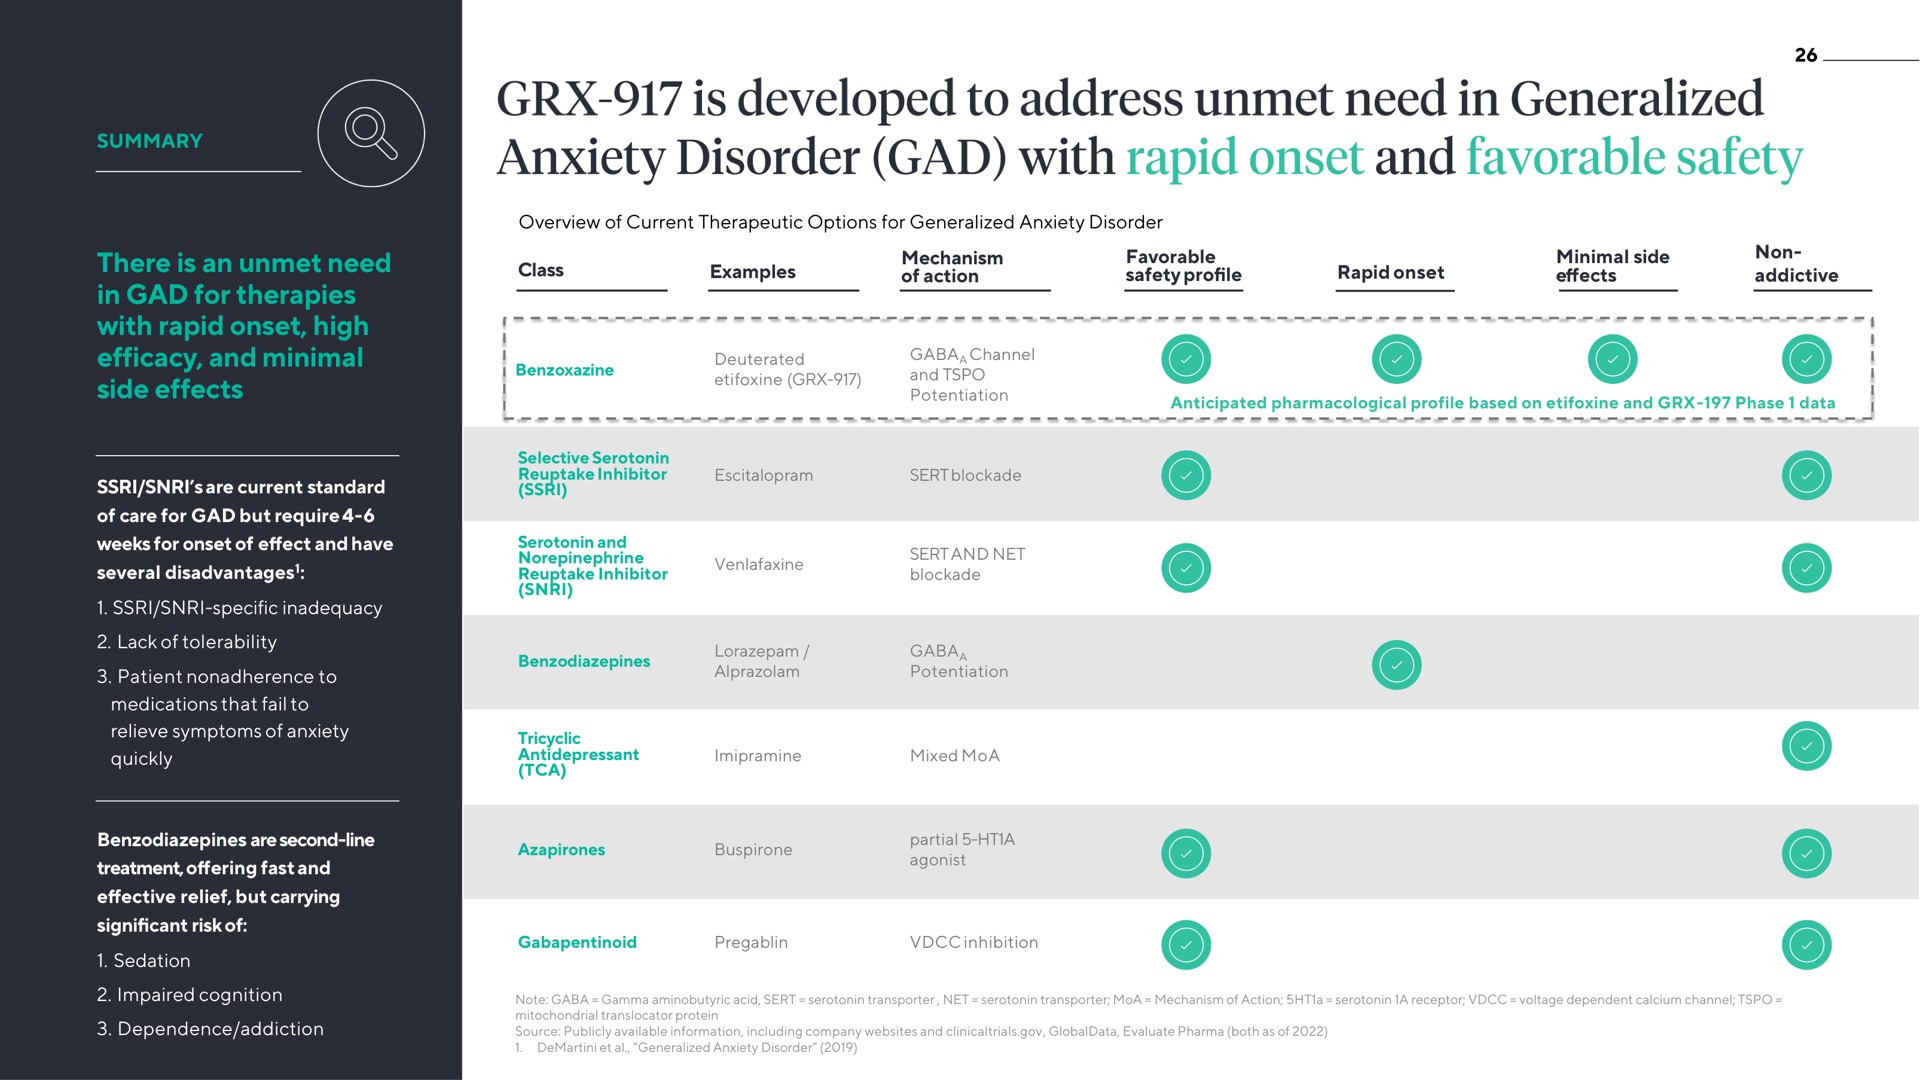 there is an unmet need in gad for therapies with rapid onset high efficacy and minimal side effects developed to address generalized anxiety disorder favorable safety | ATAI